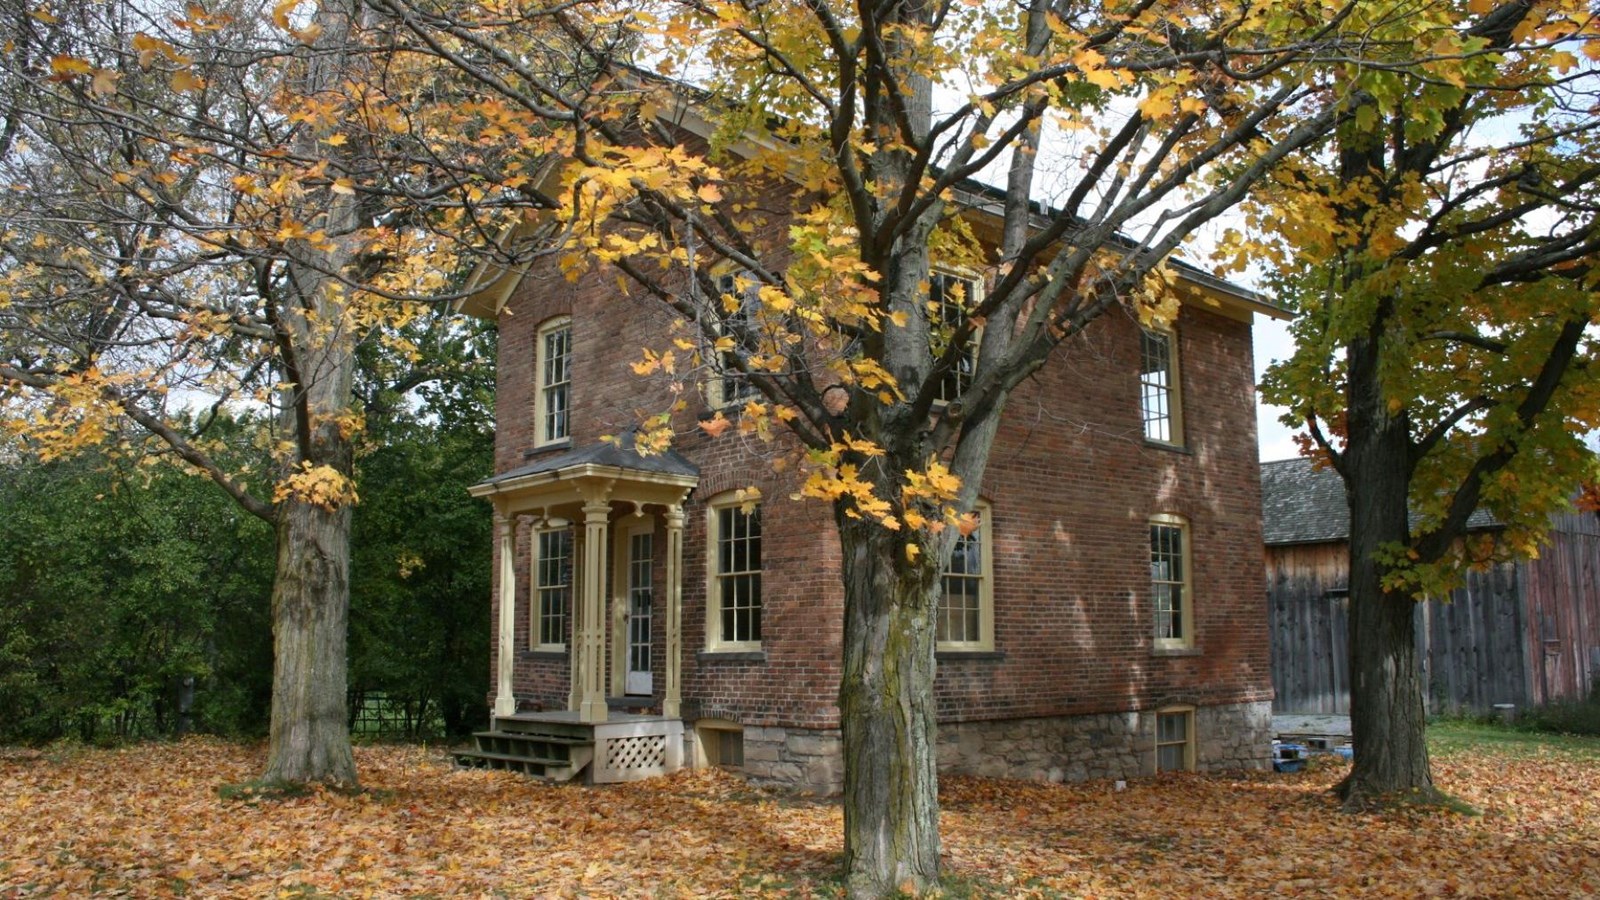 The front of a brick two-story house with small white columns in front surrounded by trees with fall